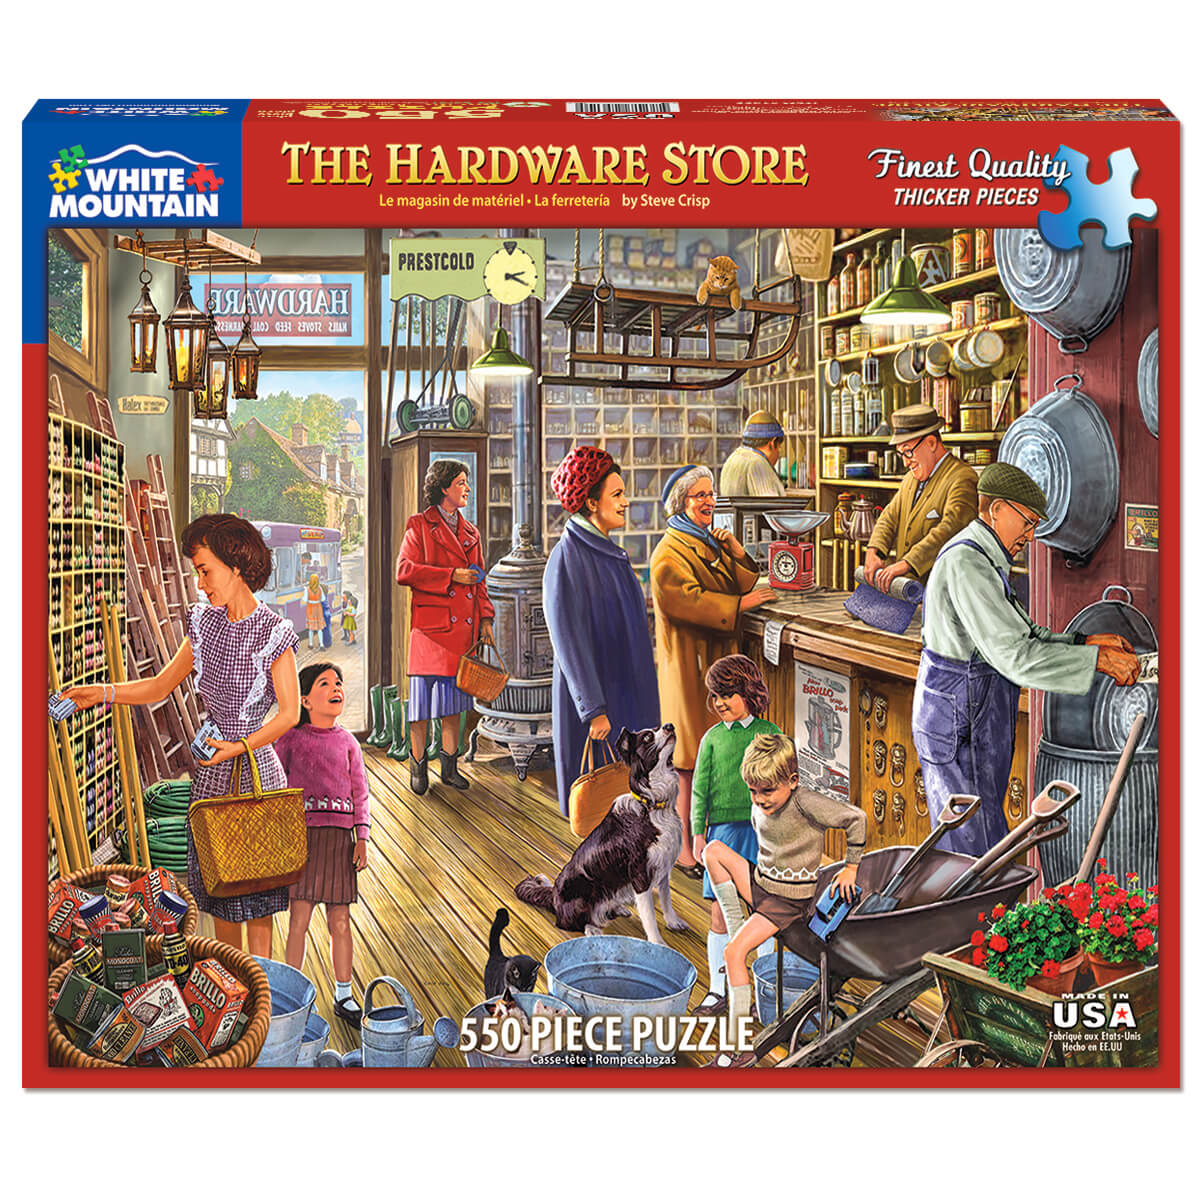 White Mountain Puzzles The Hardware Store 550 Piece Jigsaw Puzzle